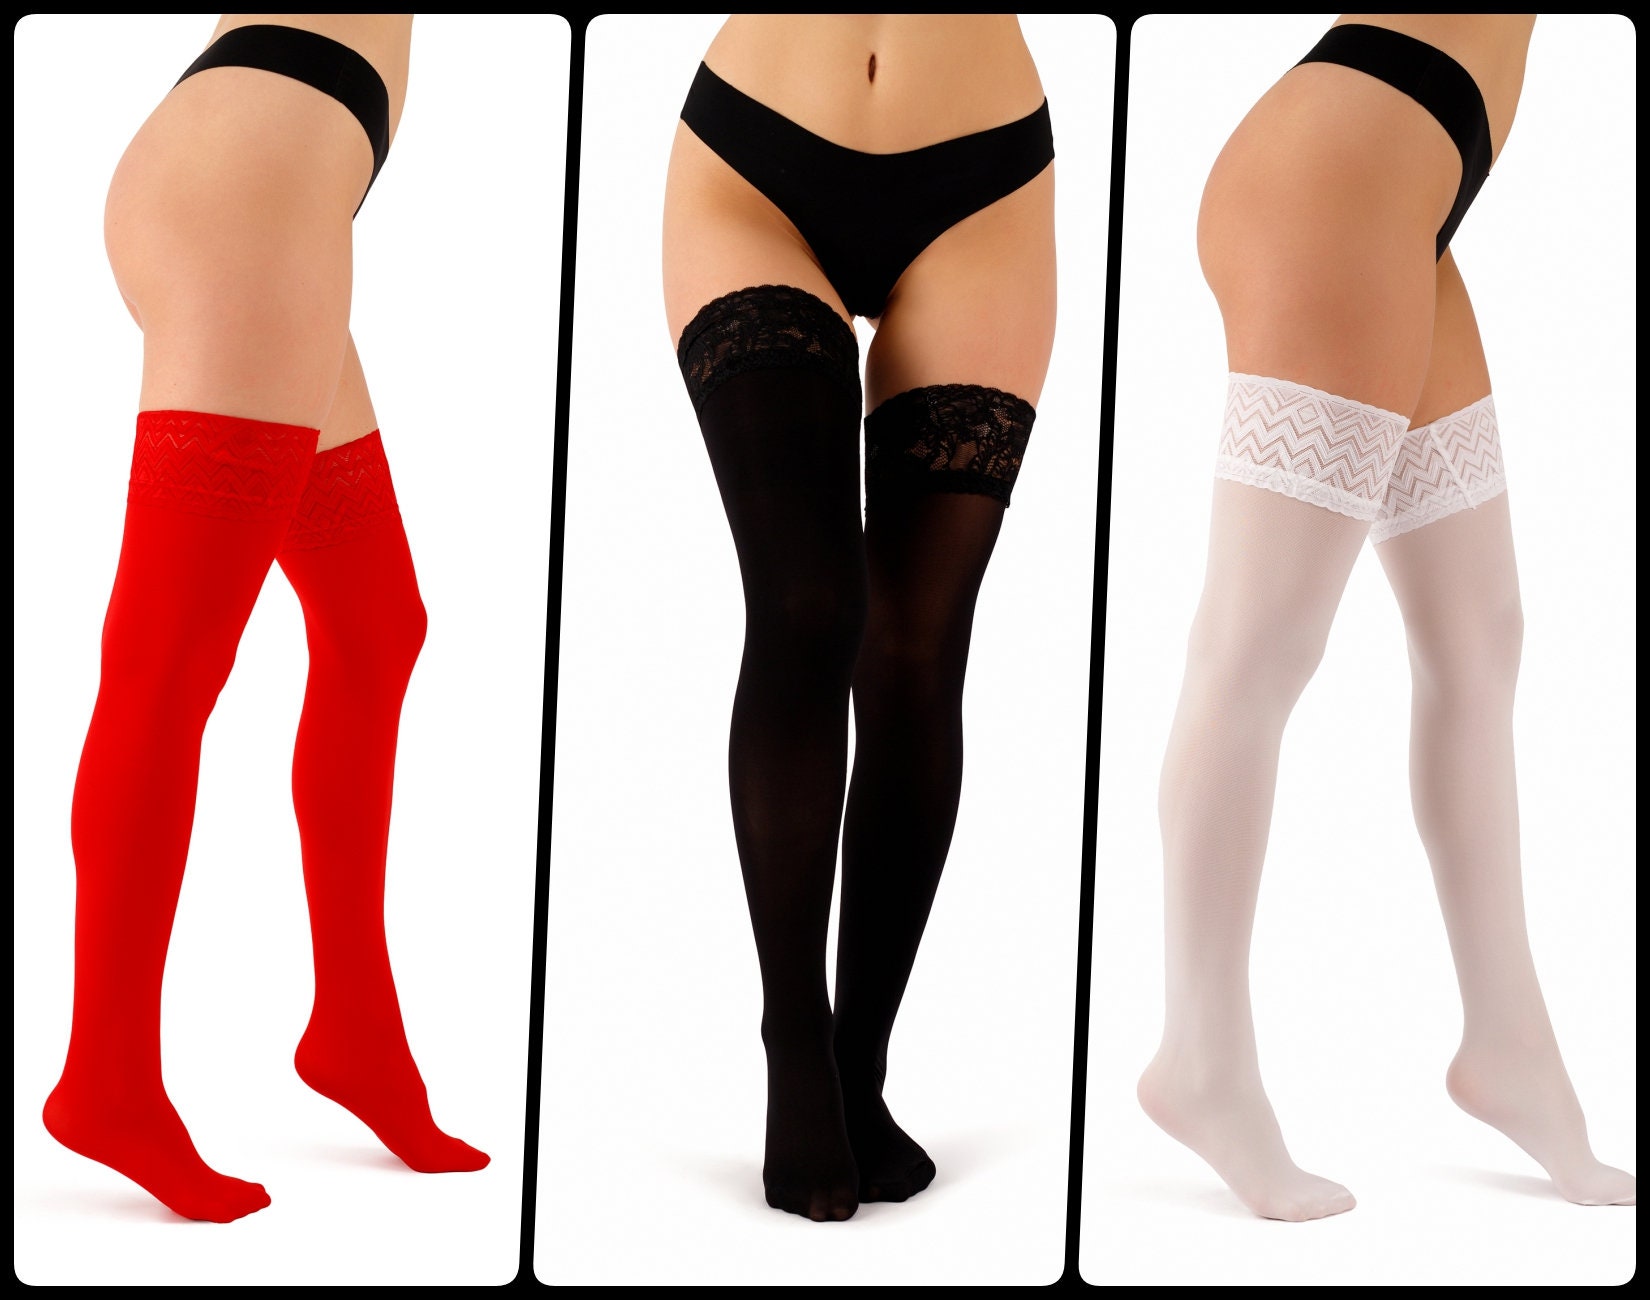 Opaque, Self-supporting Women's Stockings 60 Denier With Silicone Stripes 